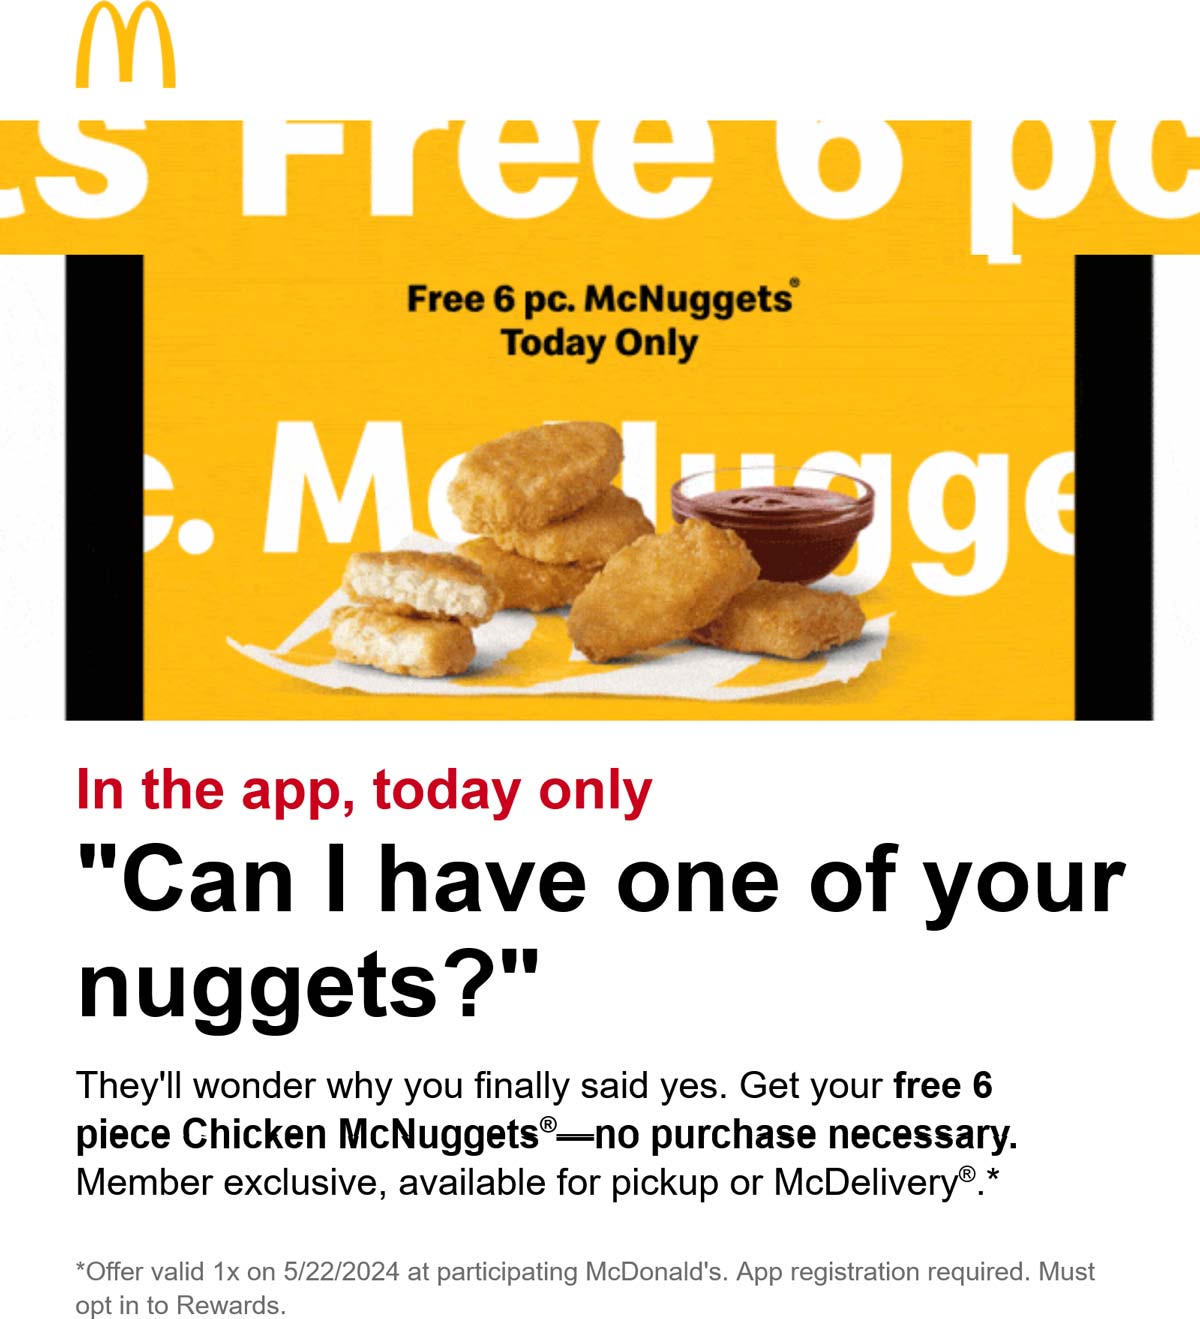 McDonalds restaurants Coupon  Free 6pc chicken nuggets via mobile today at McDonalds, no purchase necessary #mcdonalds 